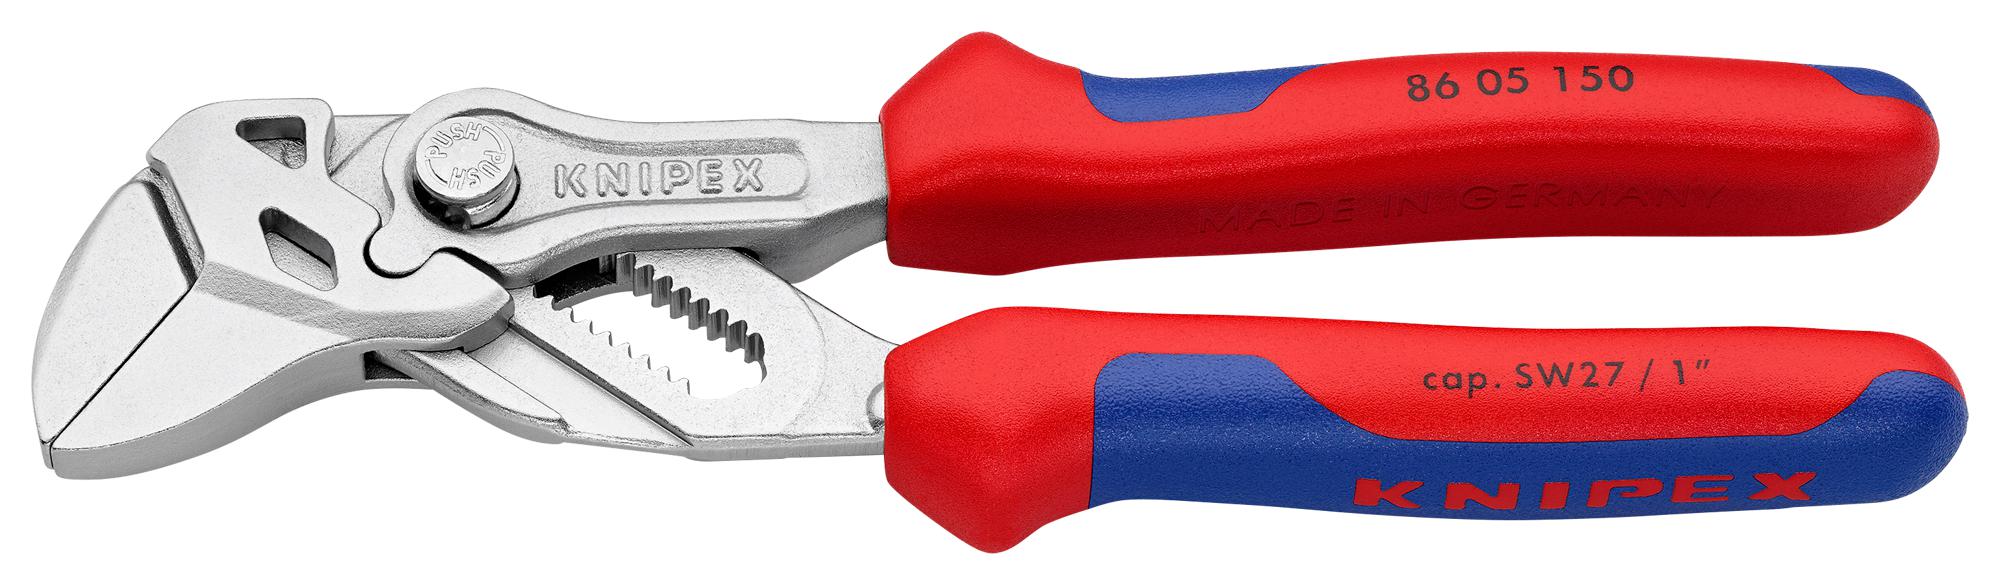 86 05 150 MINI PLIER WRENCH, 150MM KNIPEX